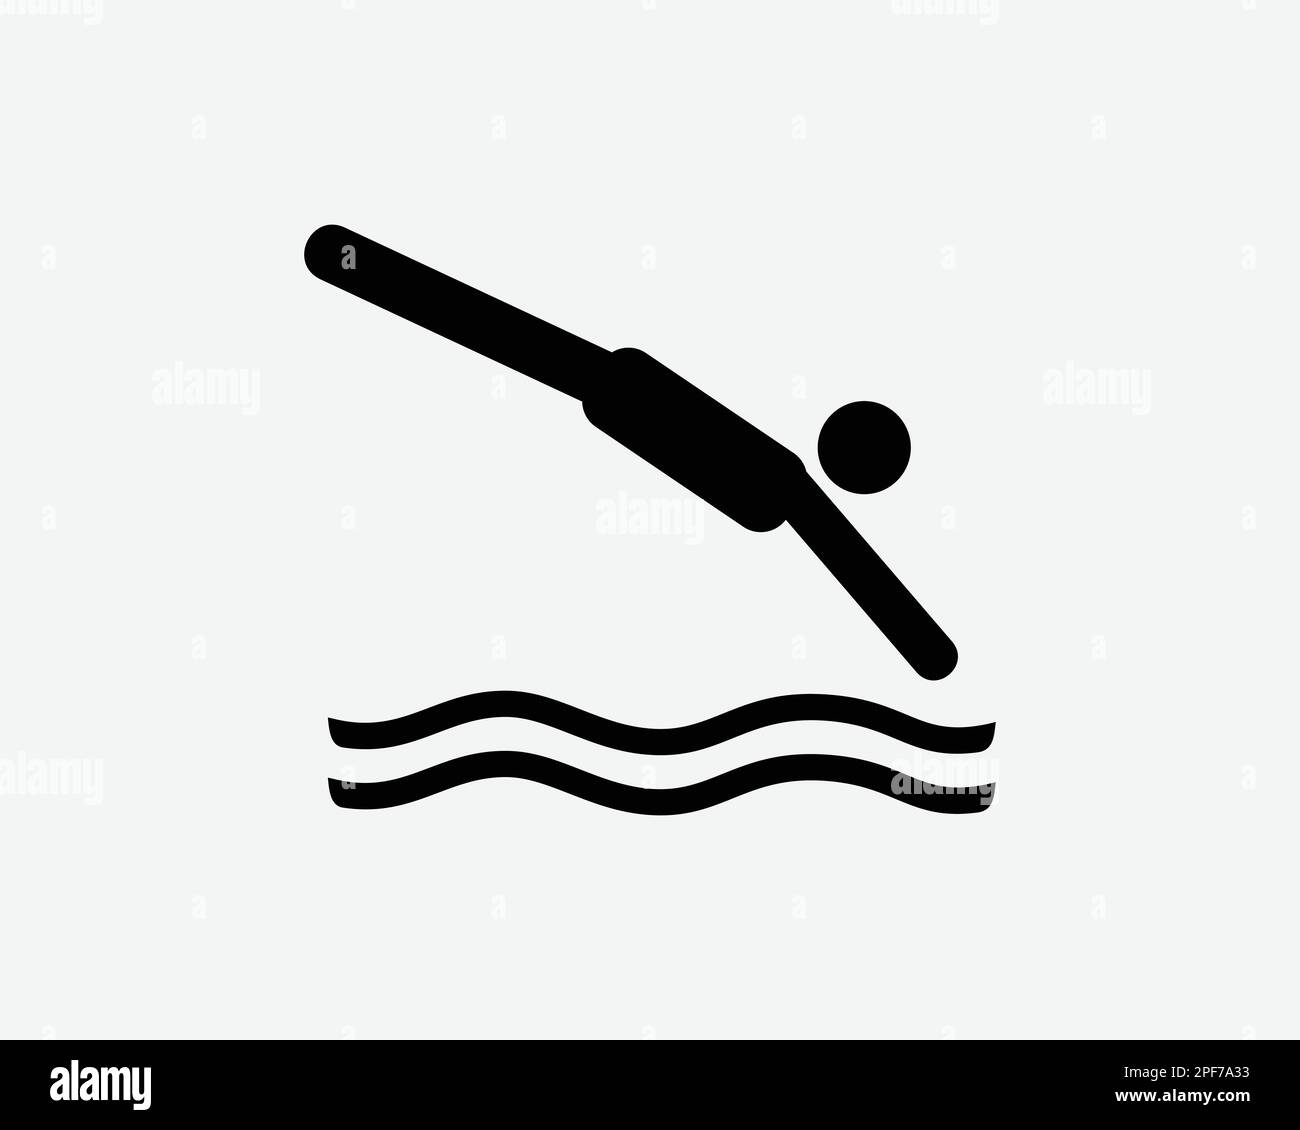 man diving into pool clipart